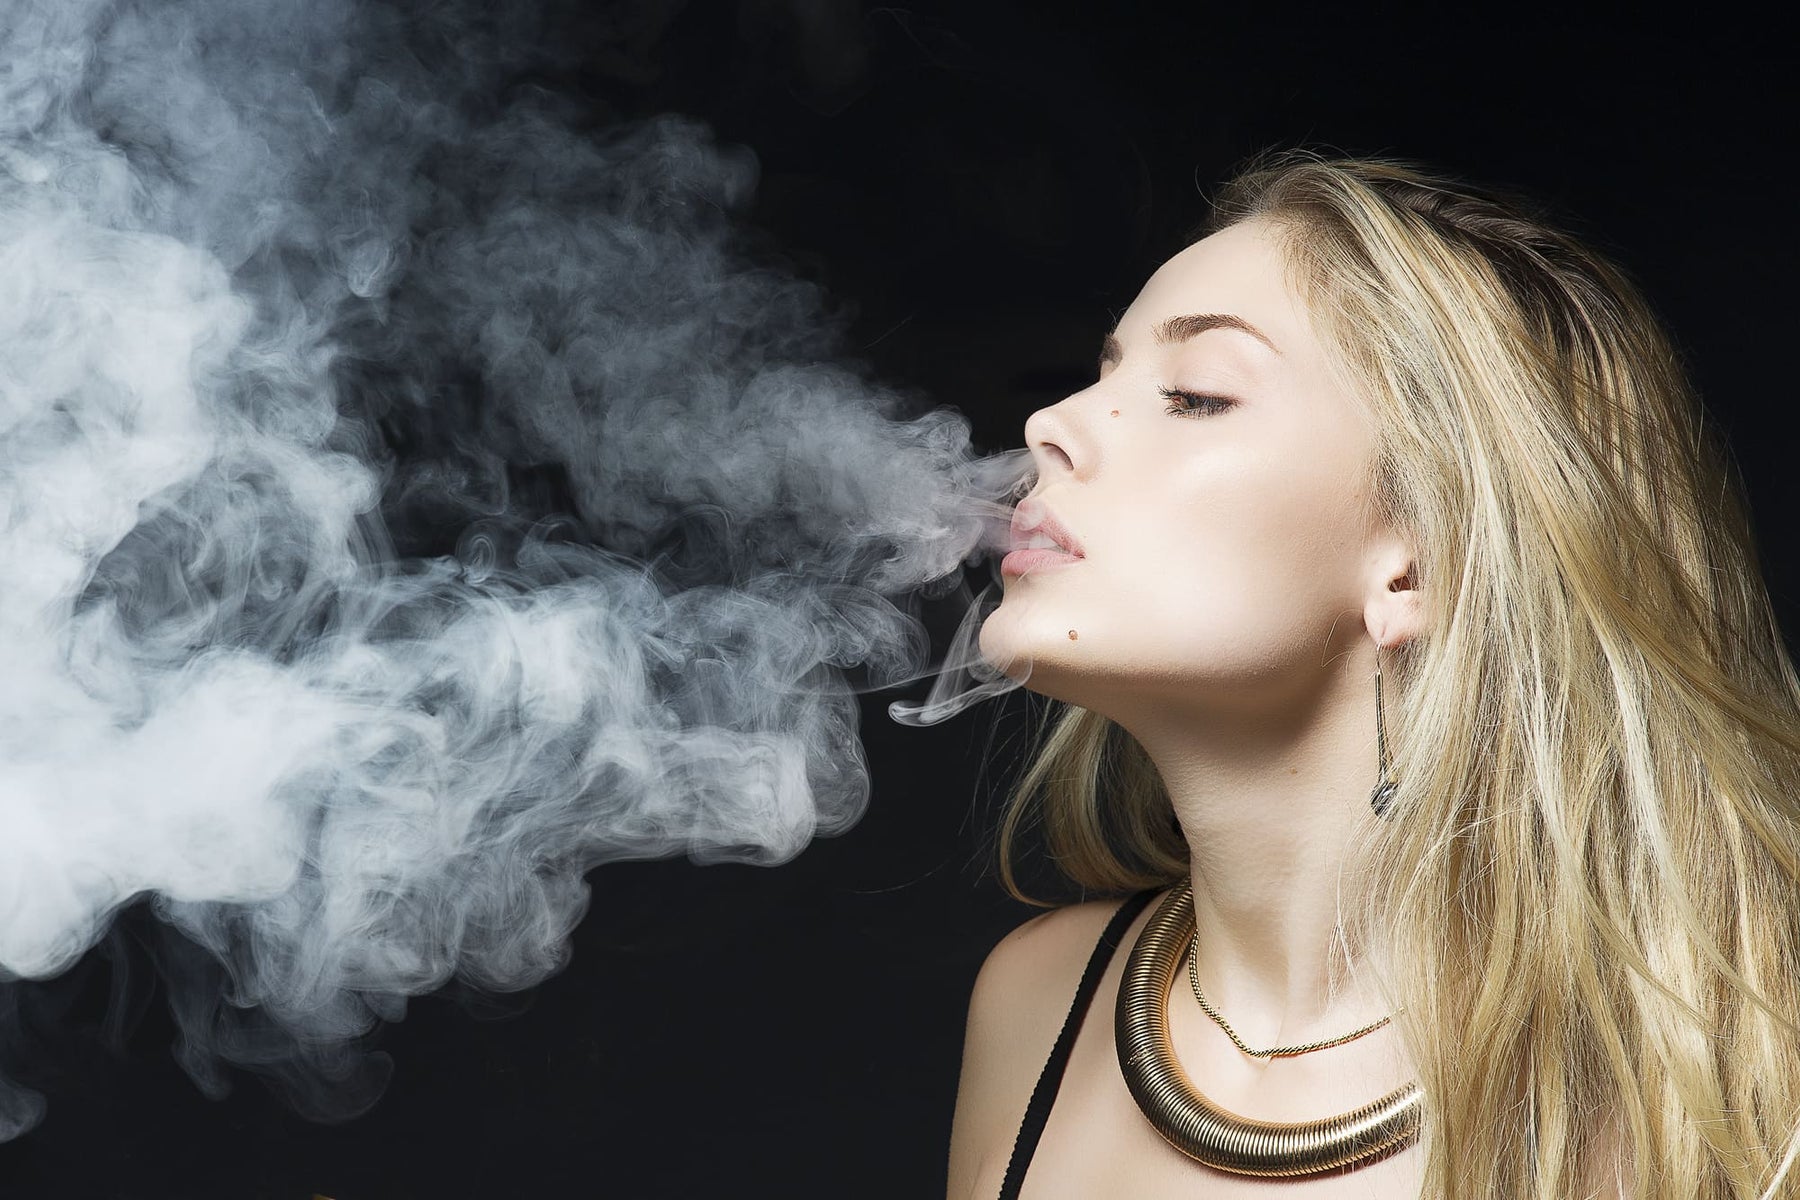 Can You Use Vaping to Quit Smoking?